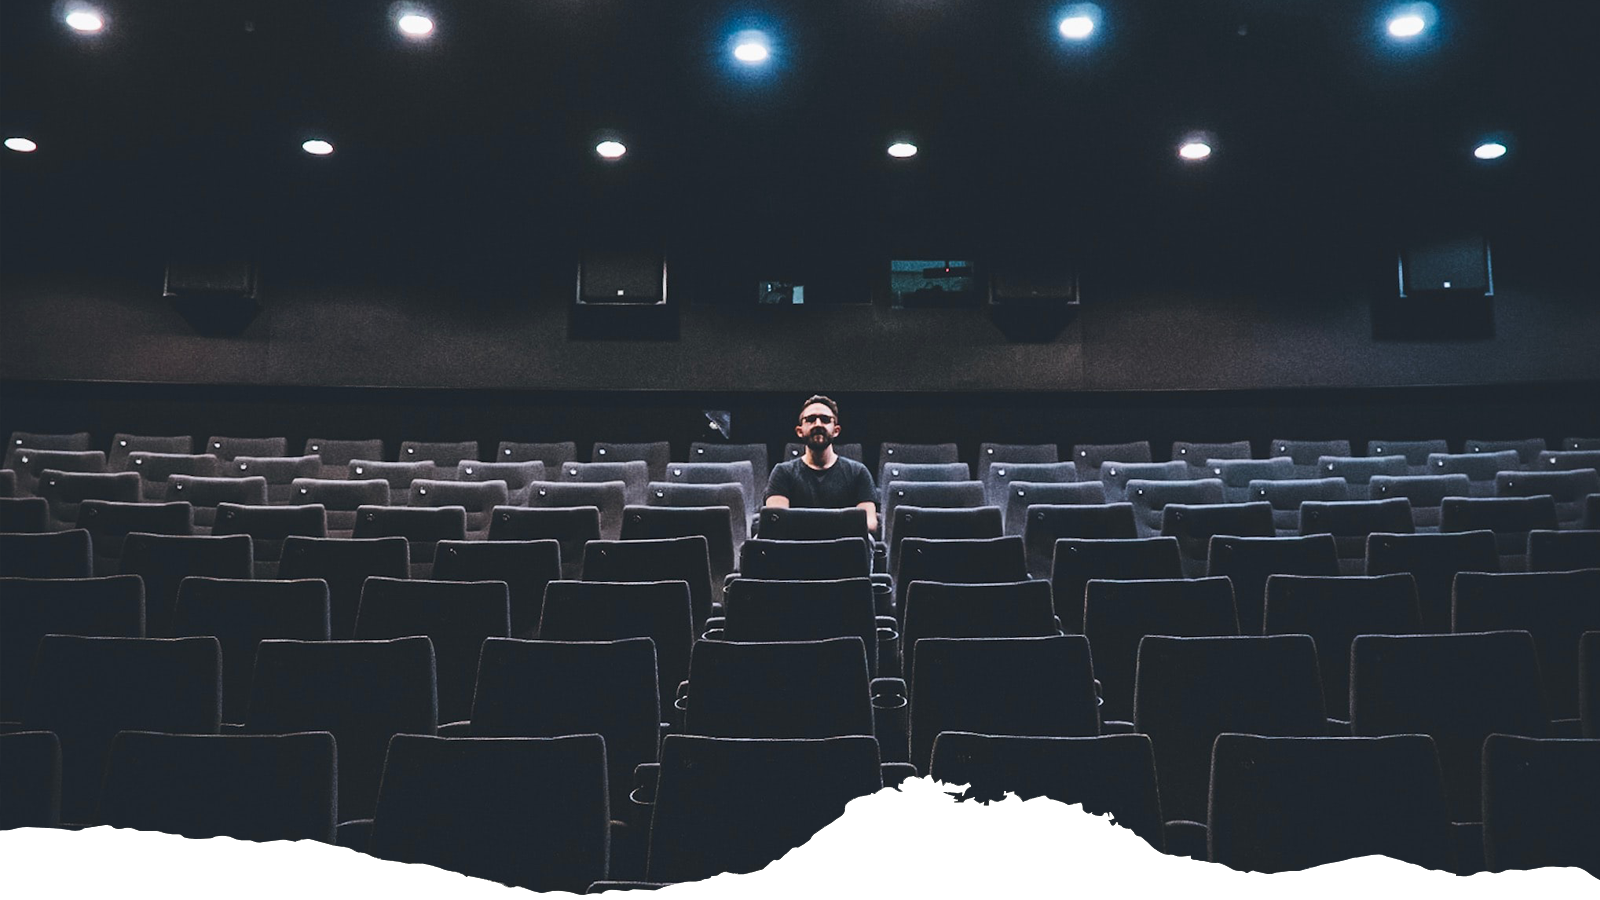 A man sits in an empty theater, illustrative of event closures from the COVID-19 pandemic.